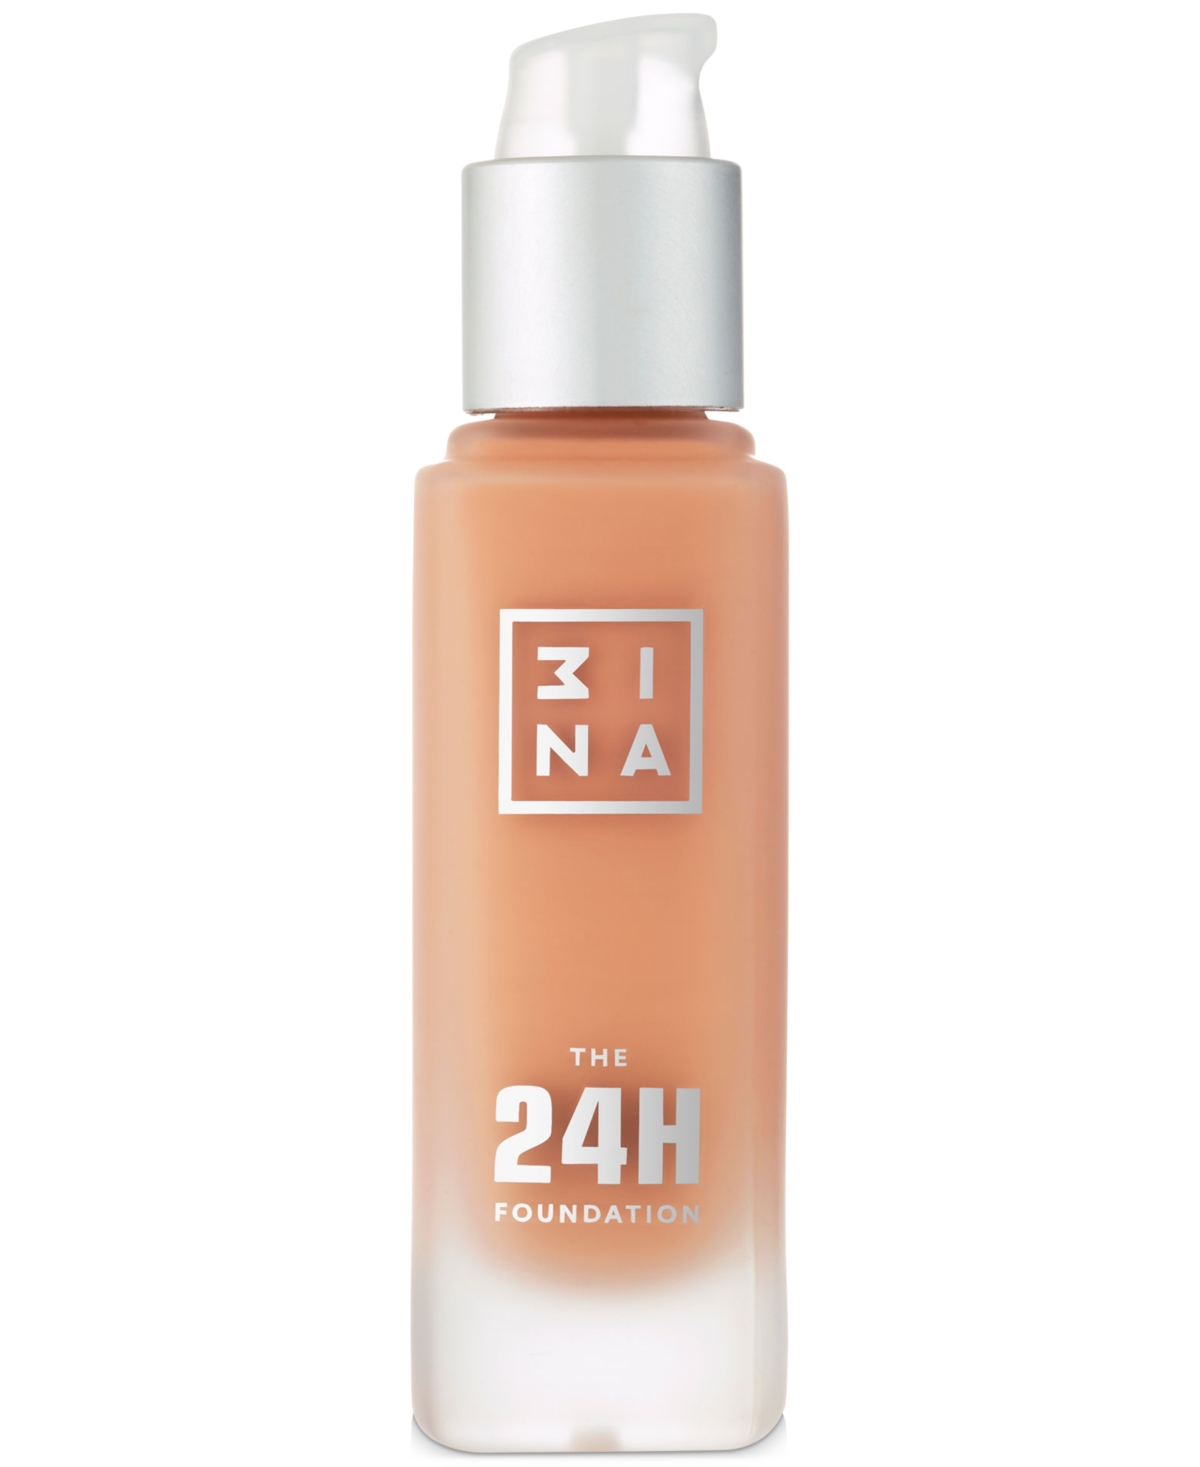 3ina The 24h Foundation In - Light Peach